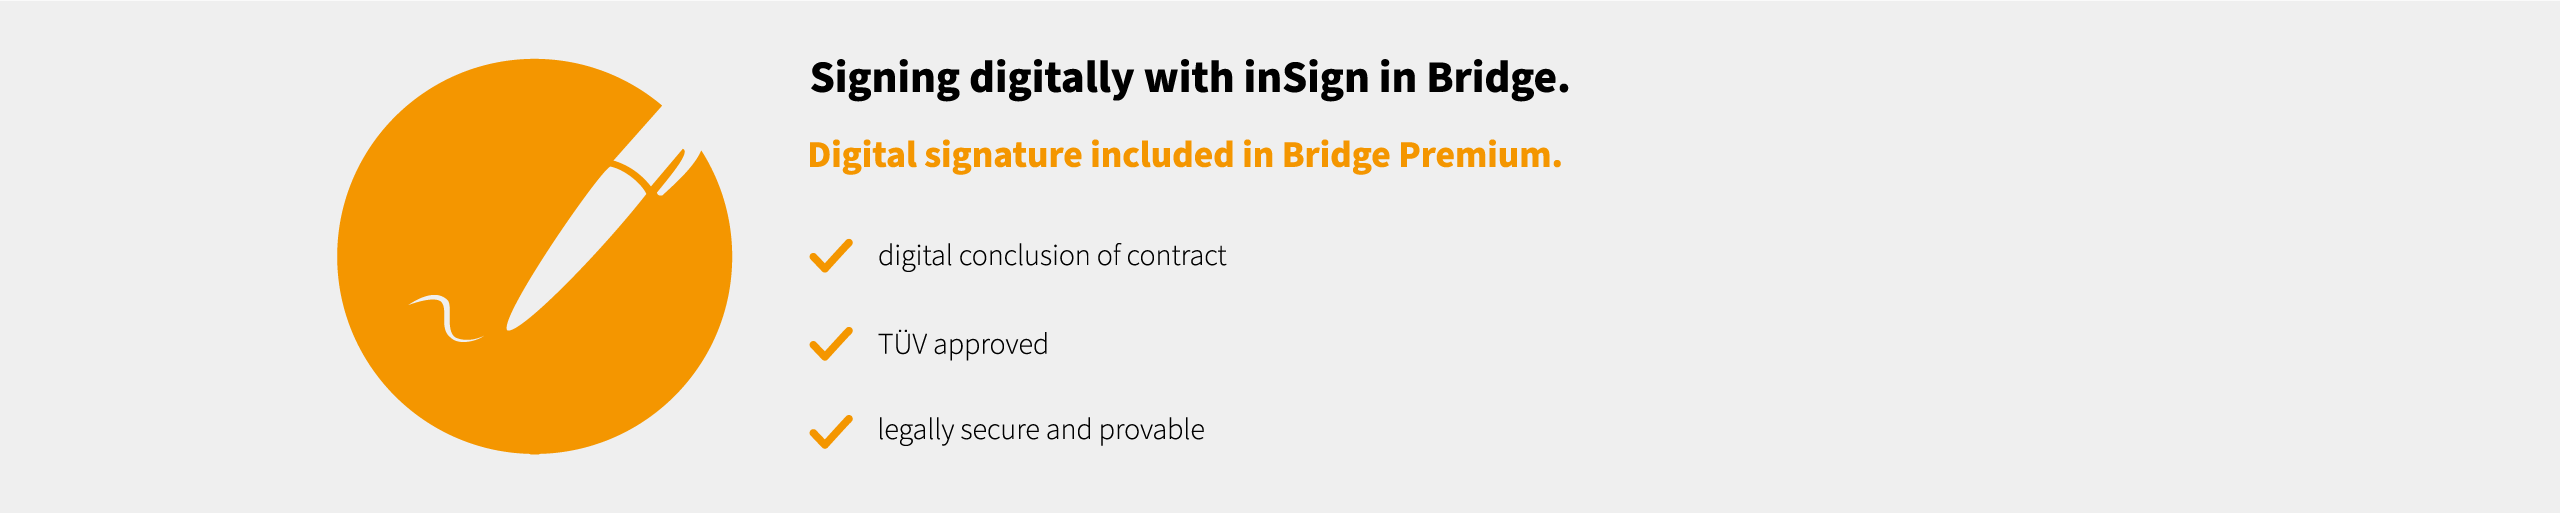 With Bridge Premium you can sign digitally